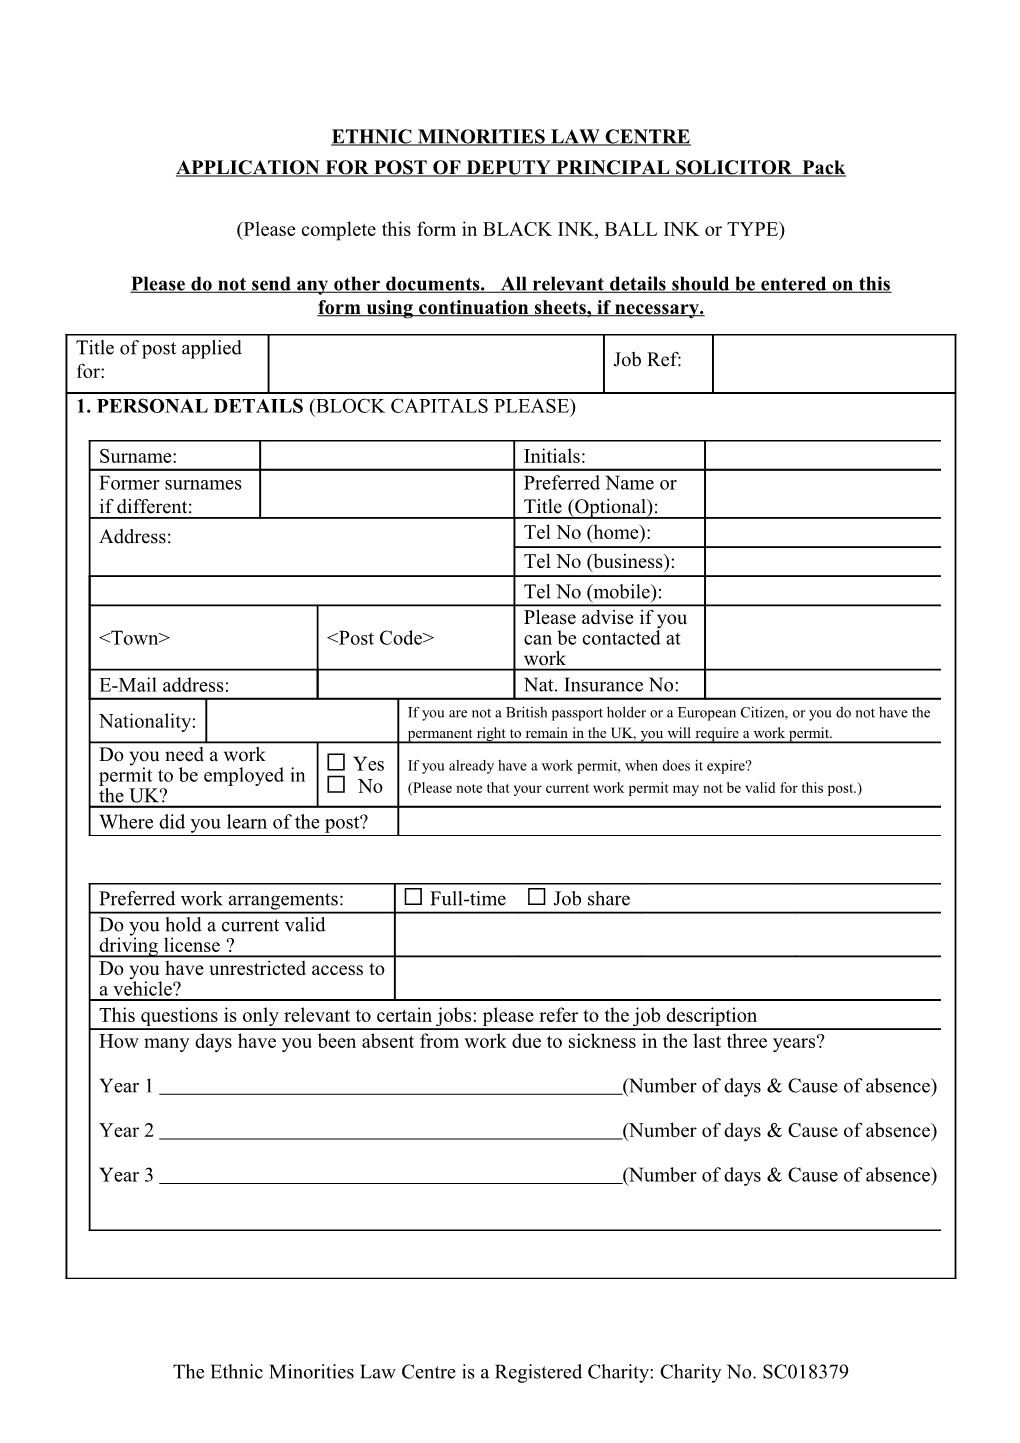 APPLICATION for POST of DEPUTY PRINCIPAL SOLICITOR Pack